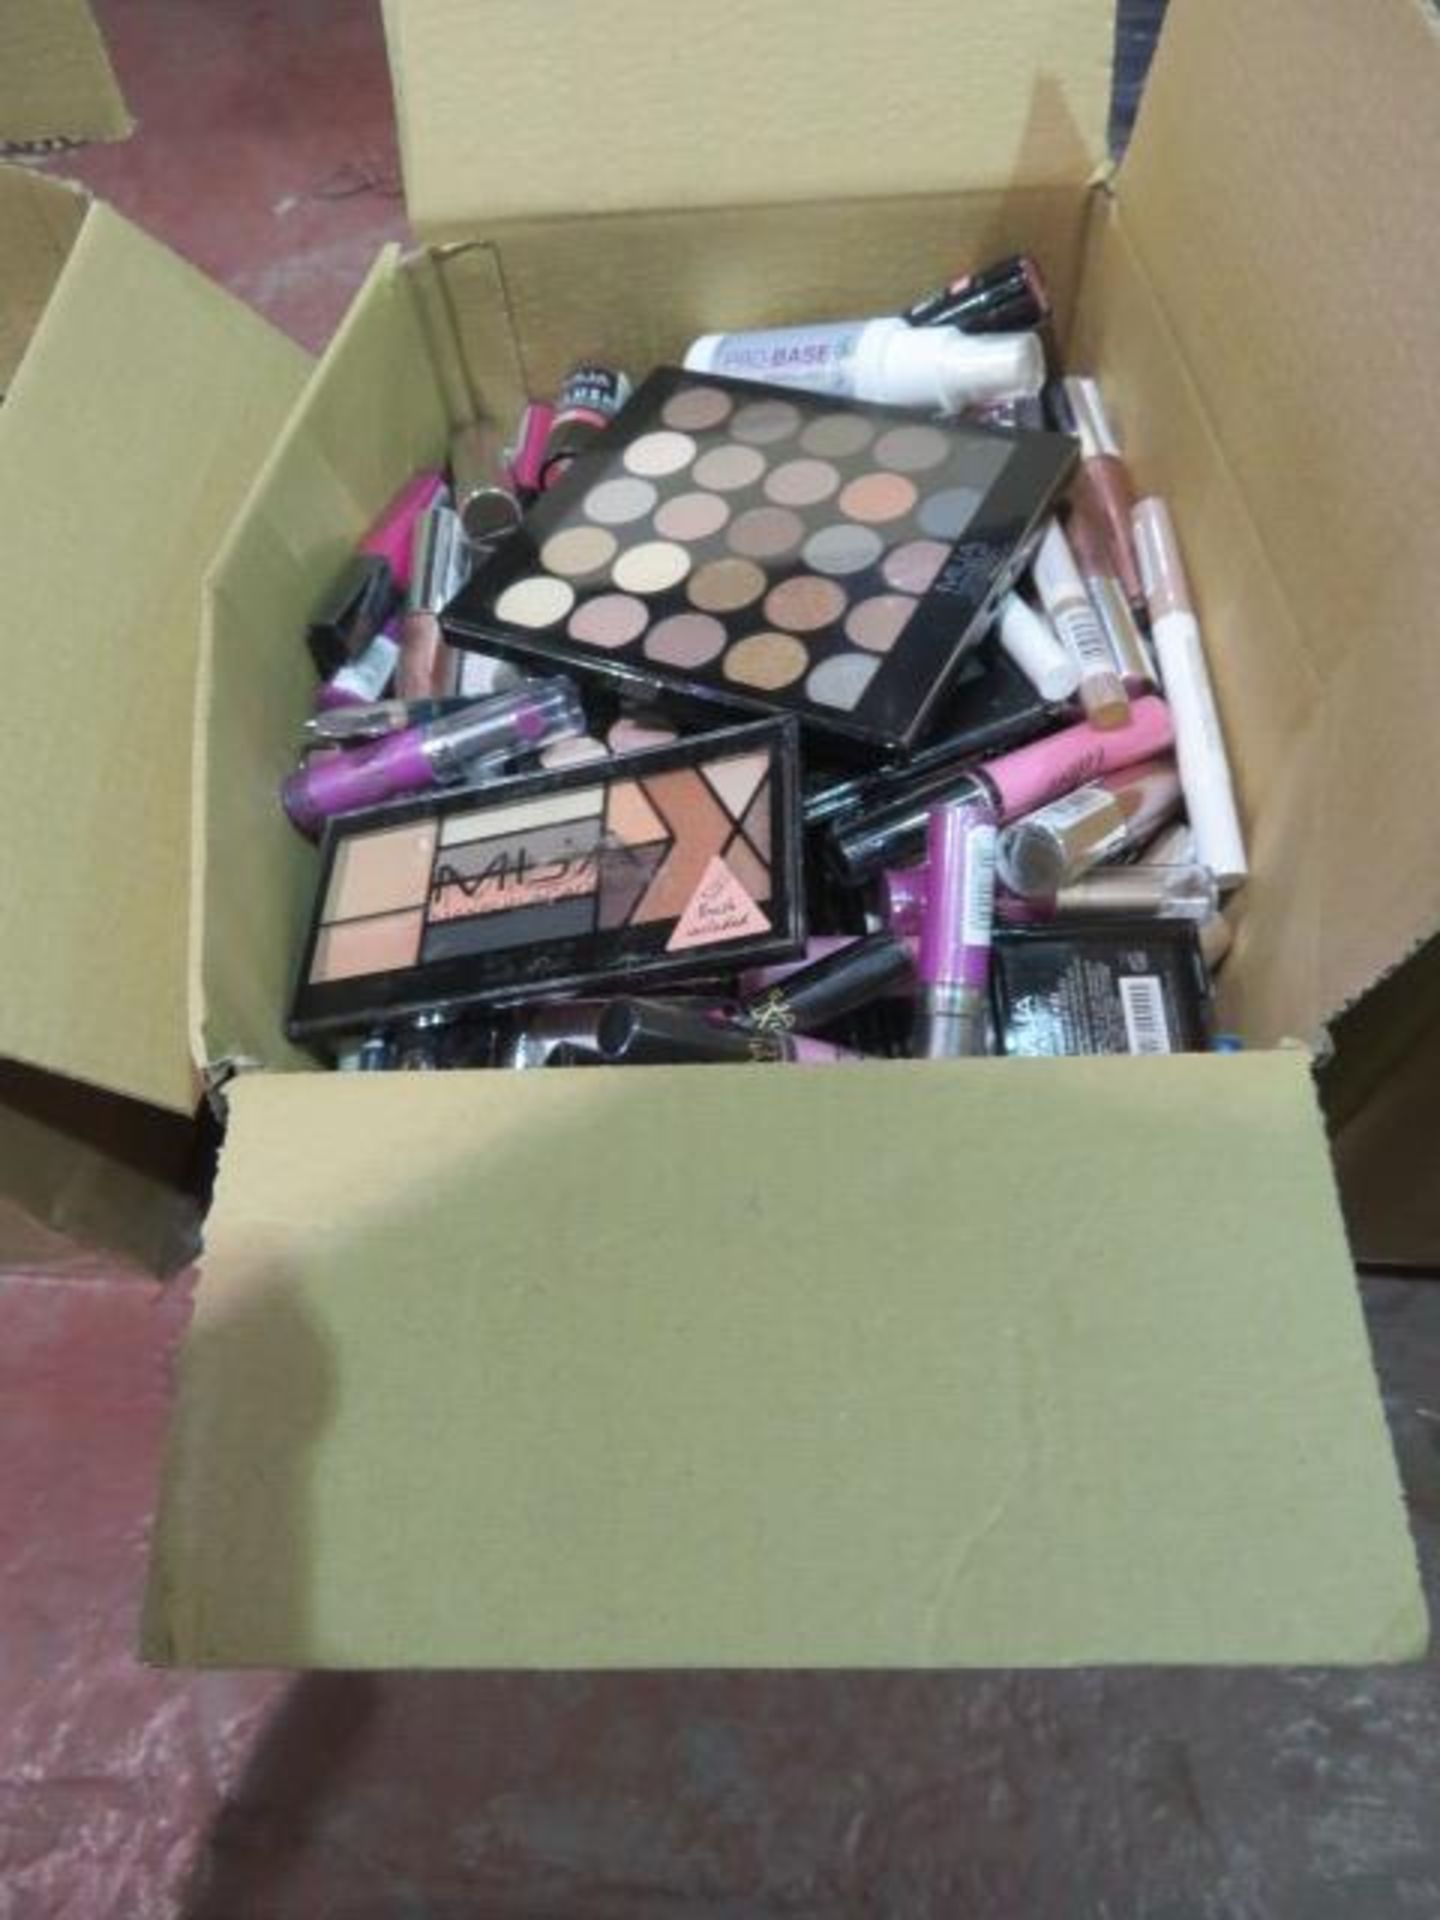 Circa. 200 items of various new make up acadamy make up to include: ultimate undressed palette, - Image 2 of 2